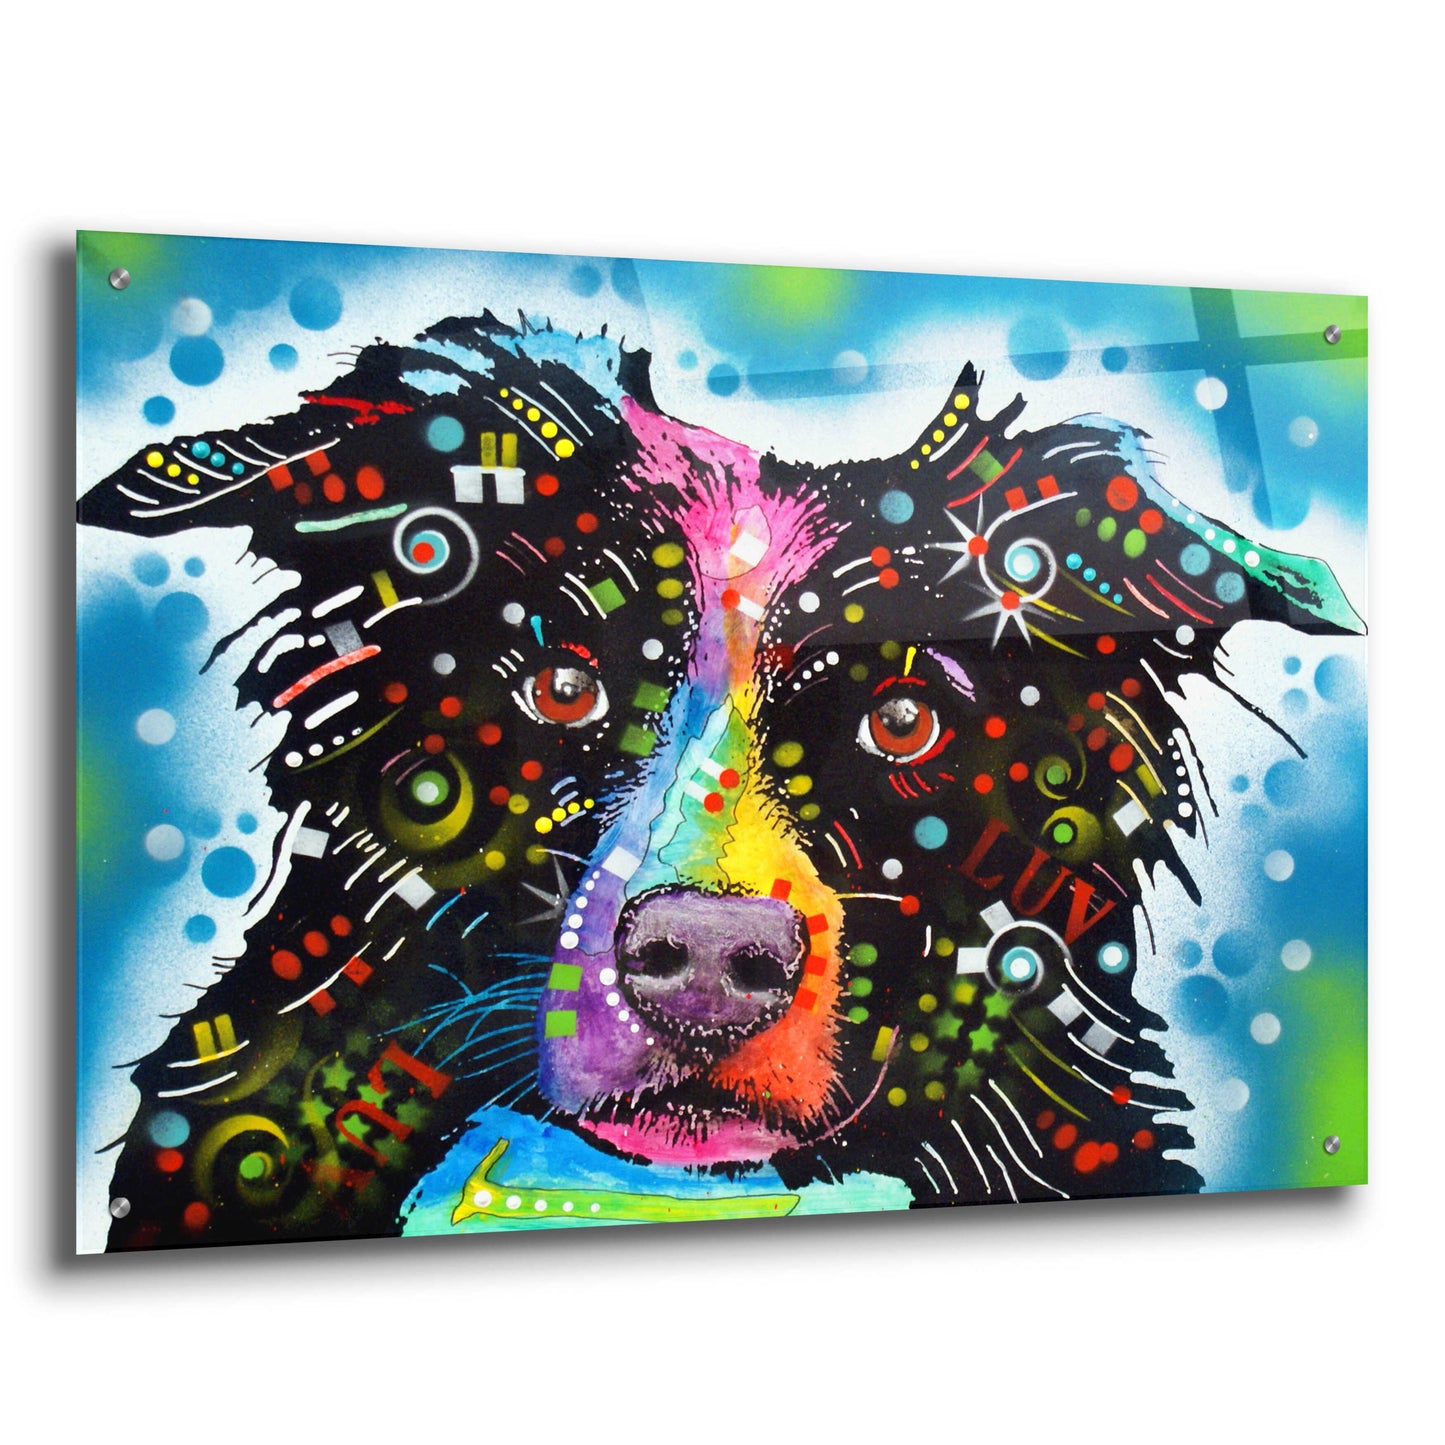 Epic Art 'Border Collie 3' by Dean Russo, Acrylic Glass Wall Art,36x24